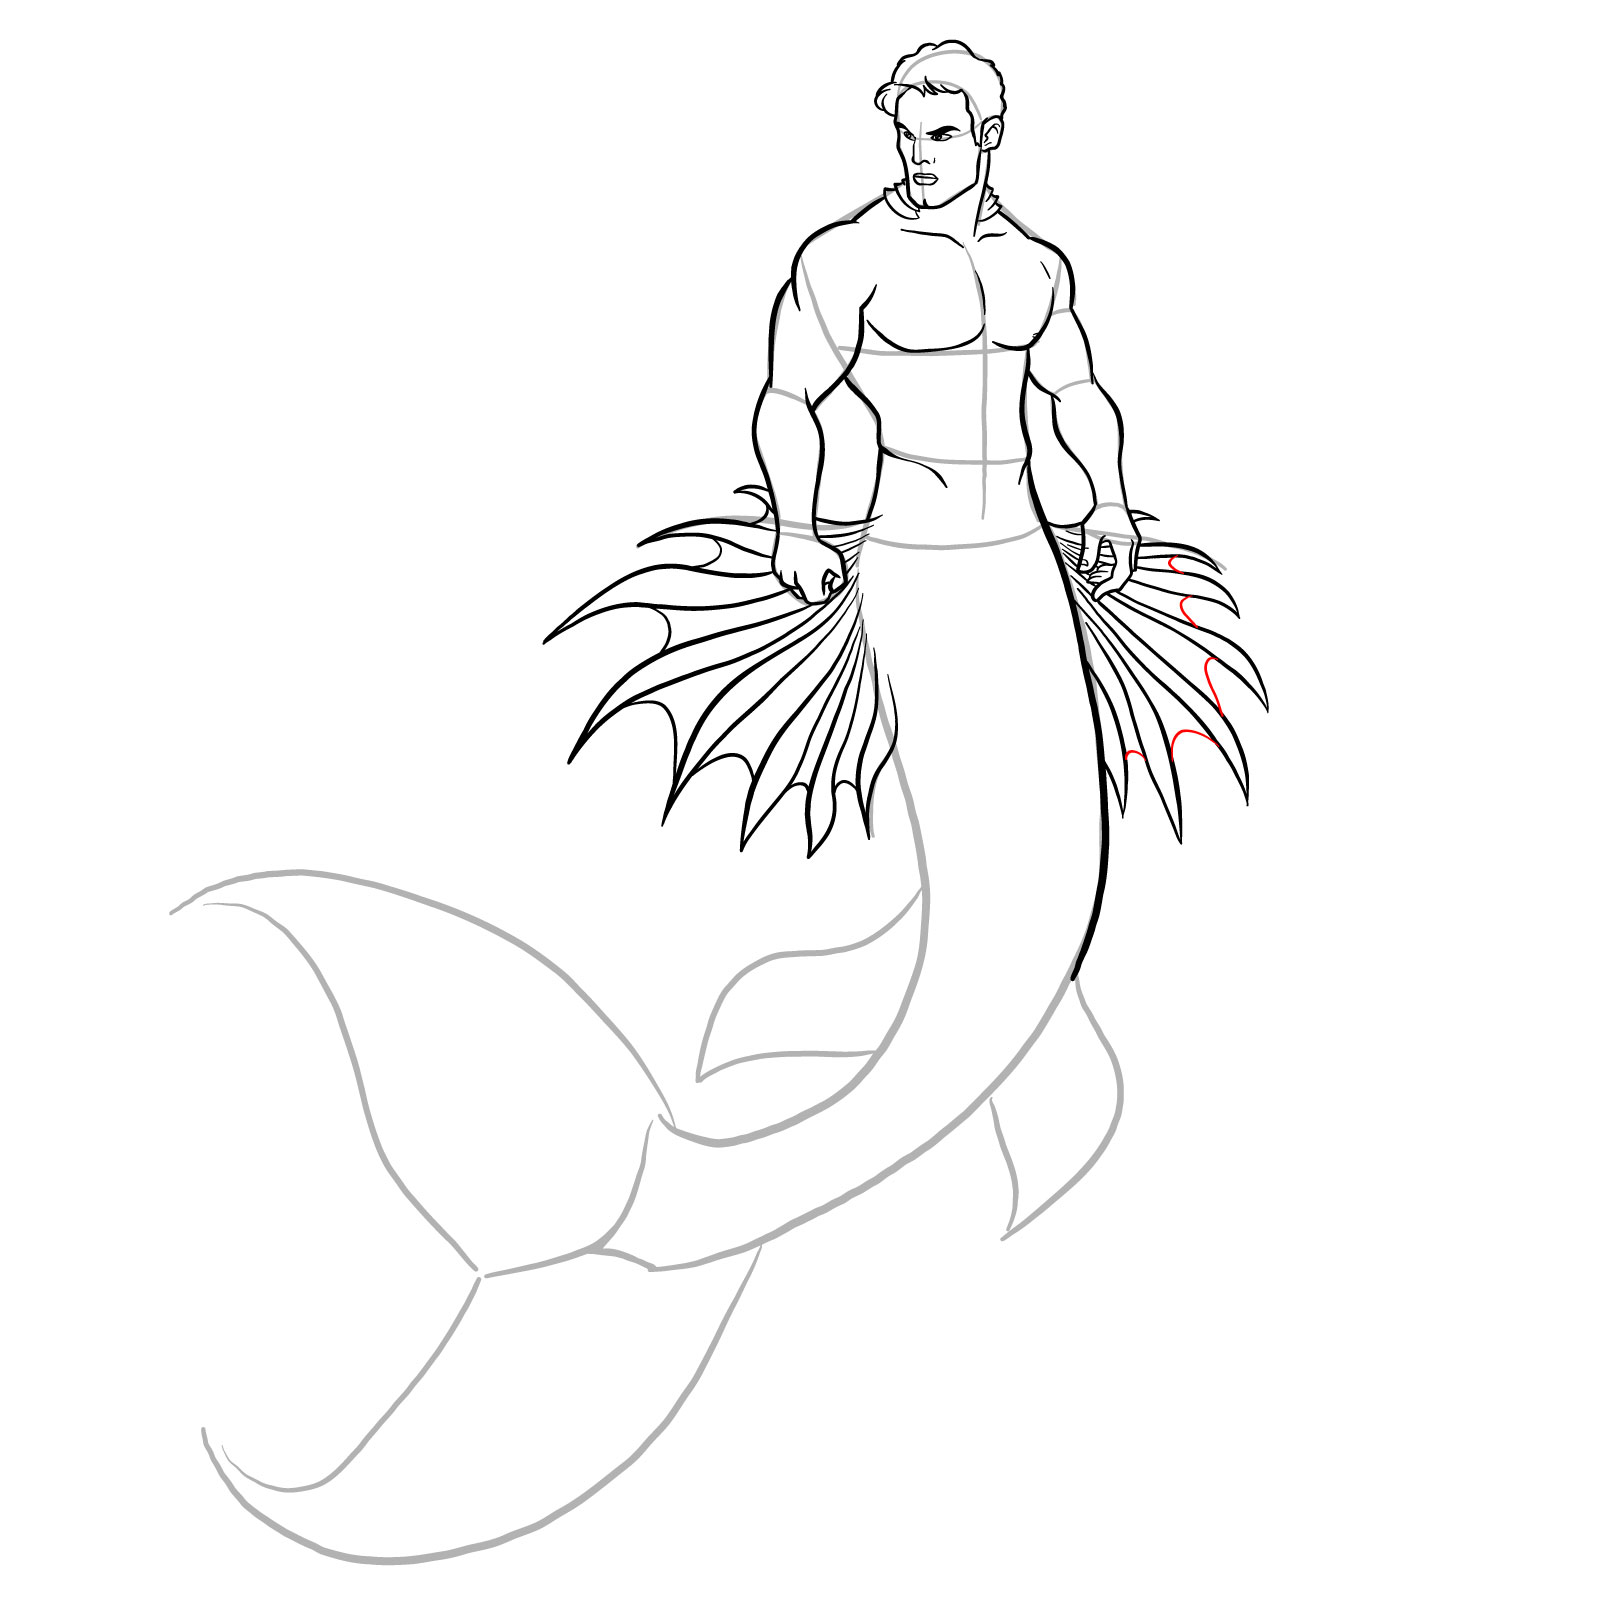 How to draw a Merman - step 30